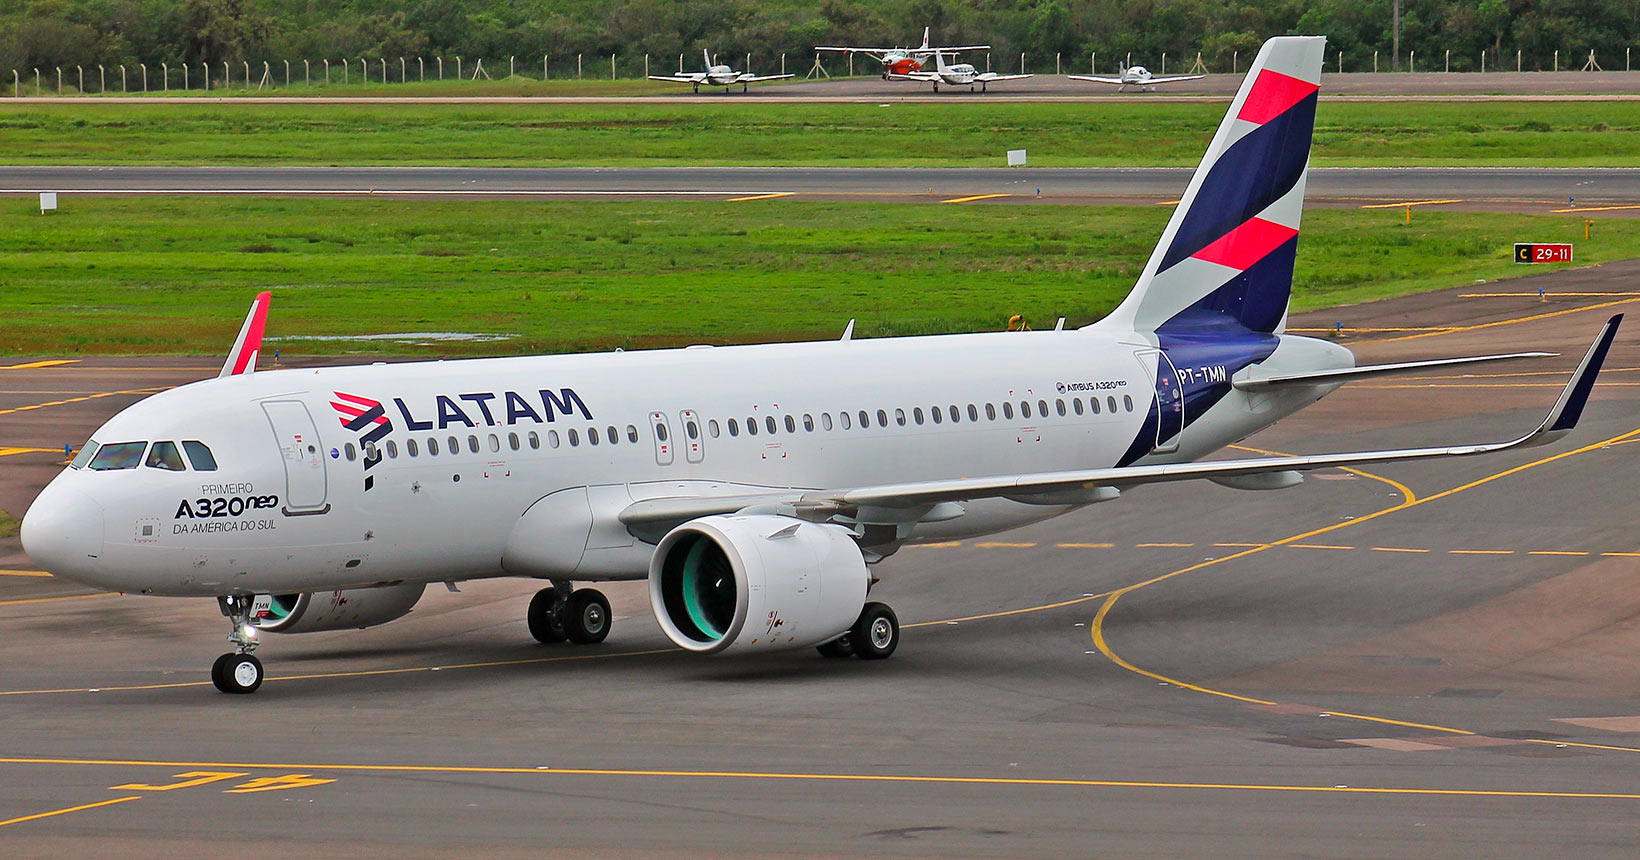 "The other LATAM Group subsidiaries will continue to connect this country's passengers with Latin America and the world," said Roberto Alvo, the group's CEO.